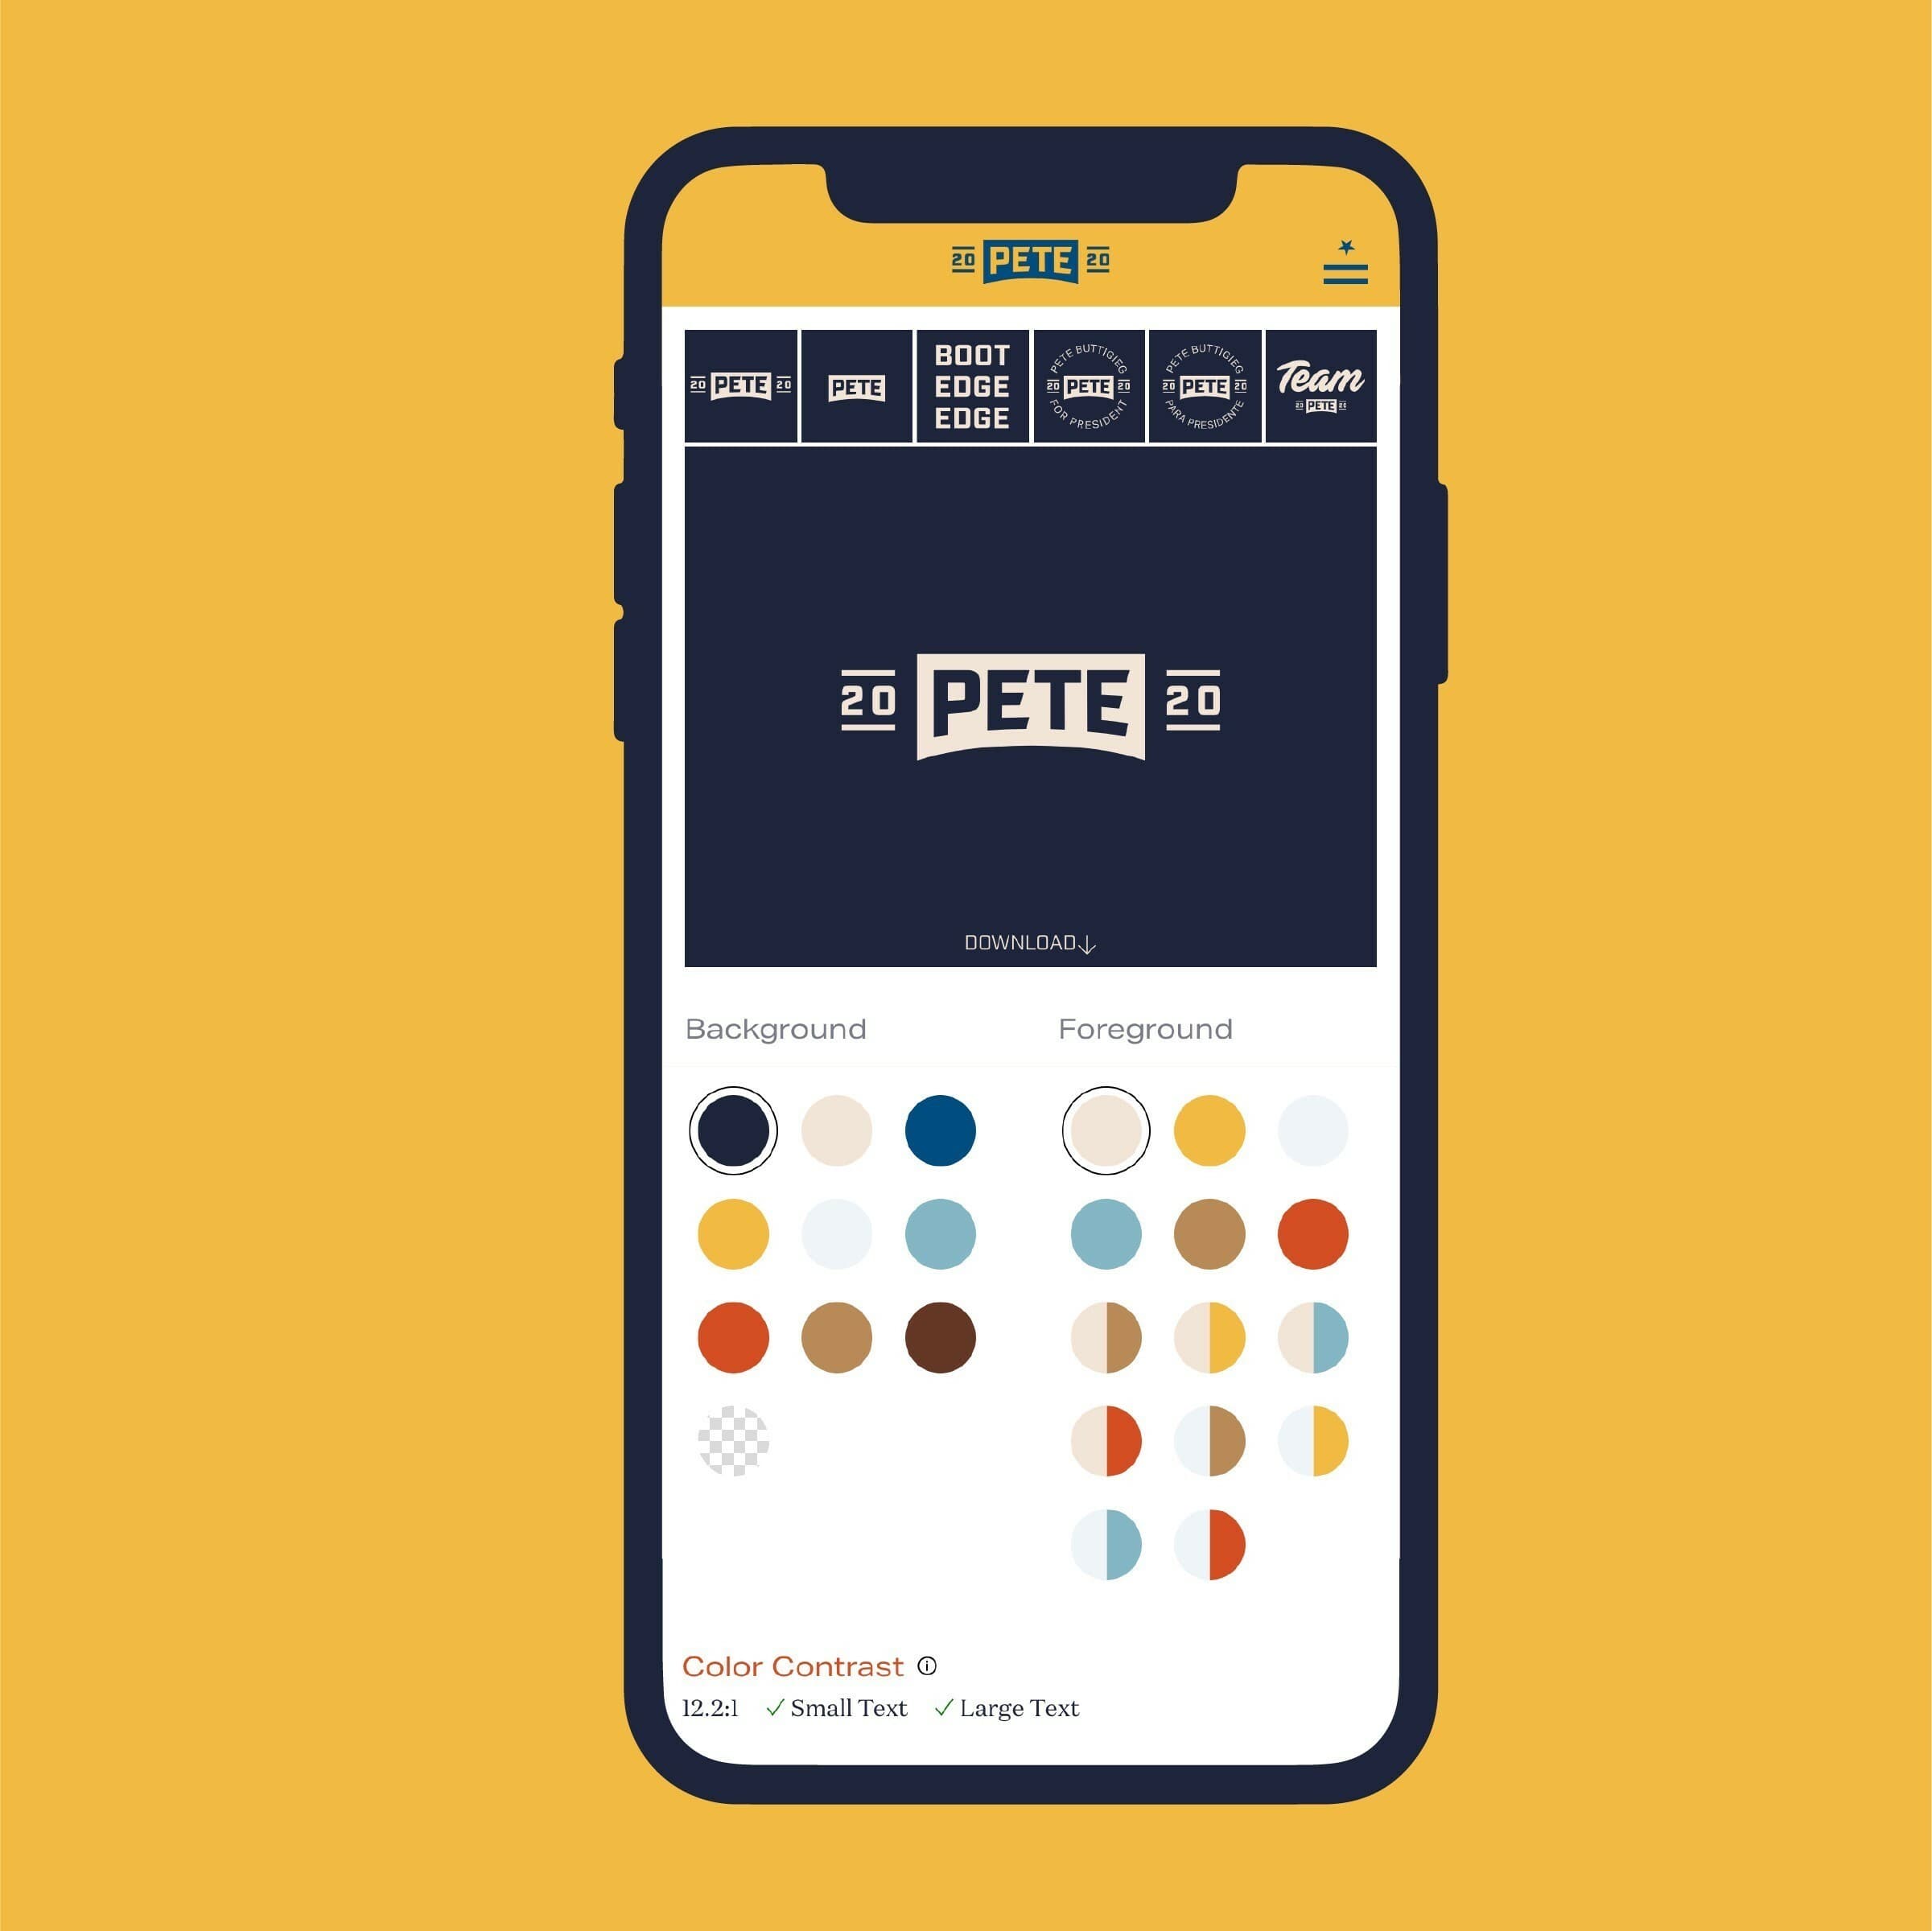 A smartphone displays a design interface with a dark blue banner that reads "PETE 2020" and several logo variations at the top. Below, there are options to change the background and foreground colors, with various color swatches available. The phone has a yellow background.